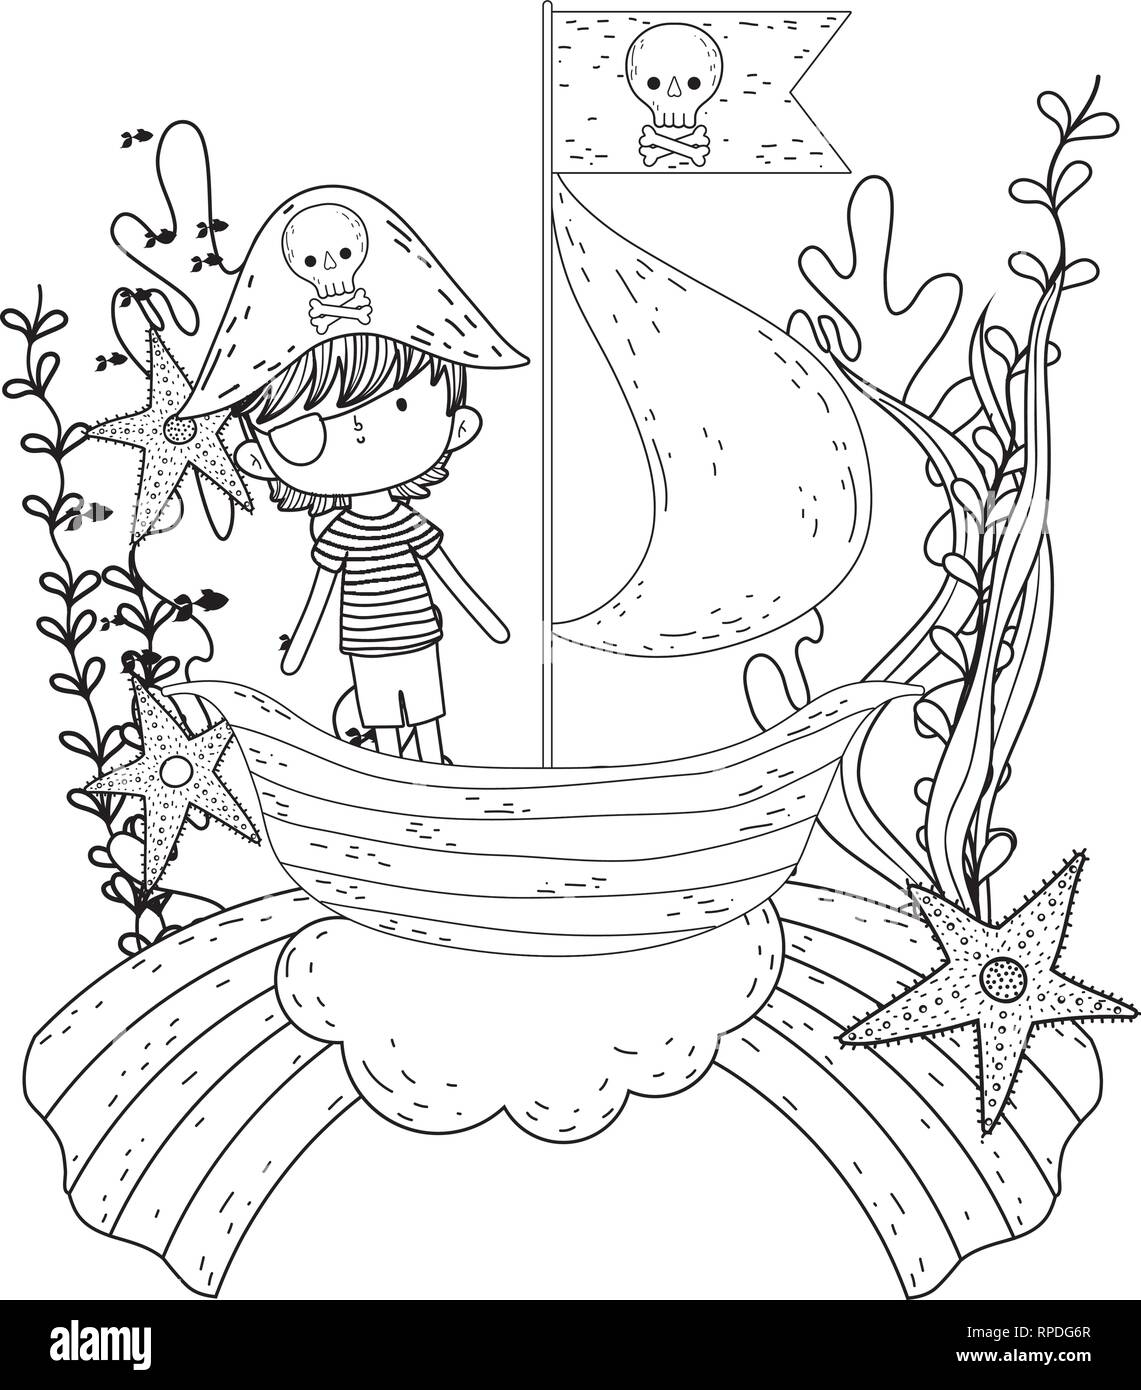 little pirate in boat with rainbow Stock Vector